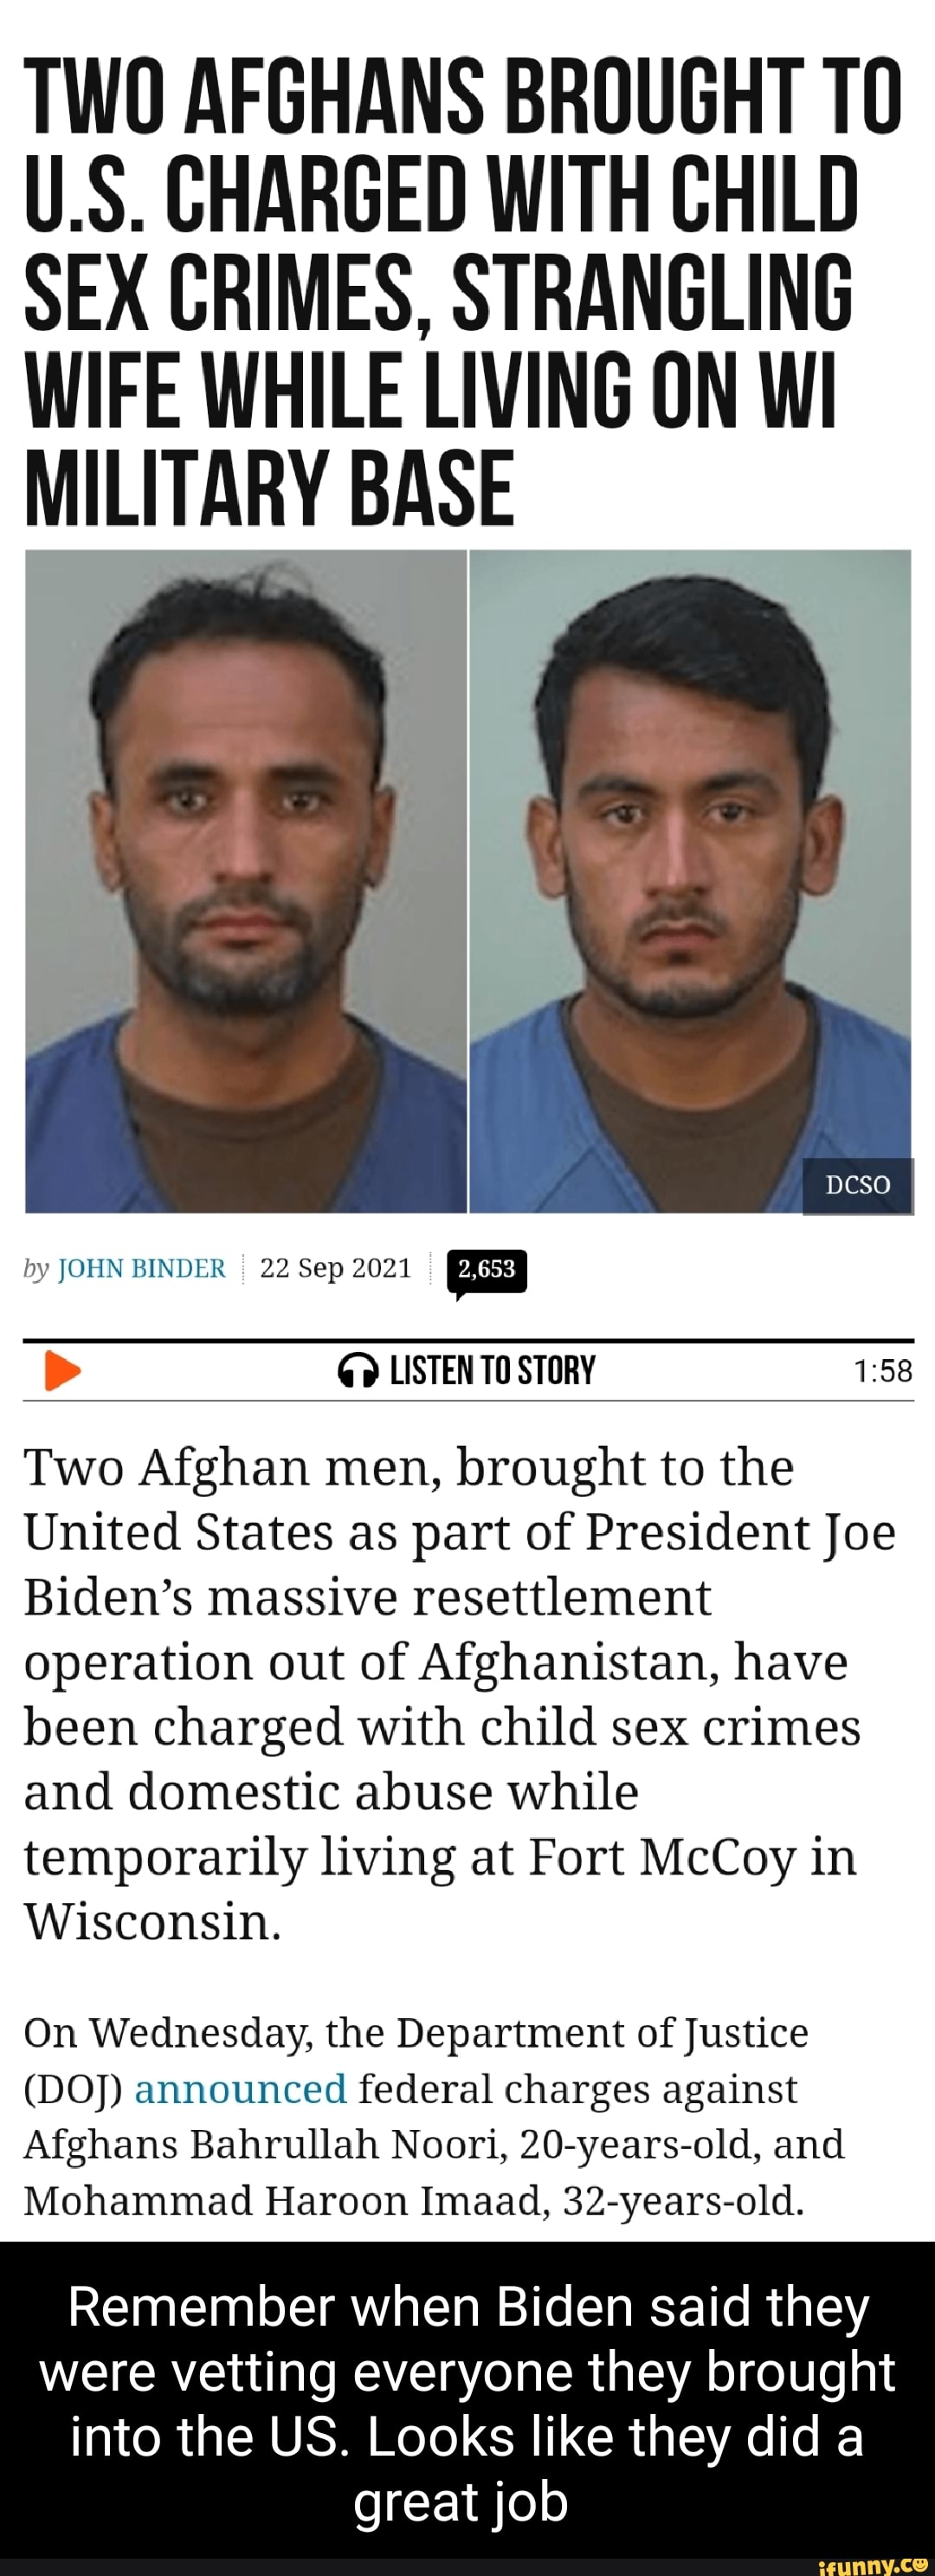 TWO AFGHANS BROUGHT